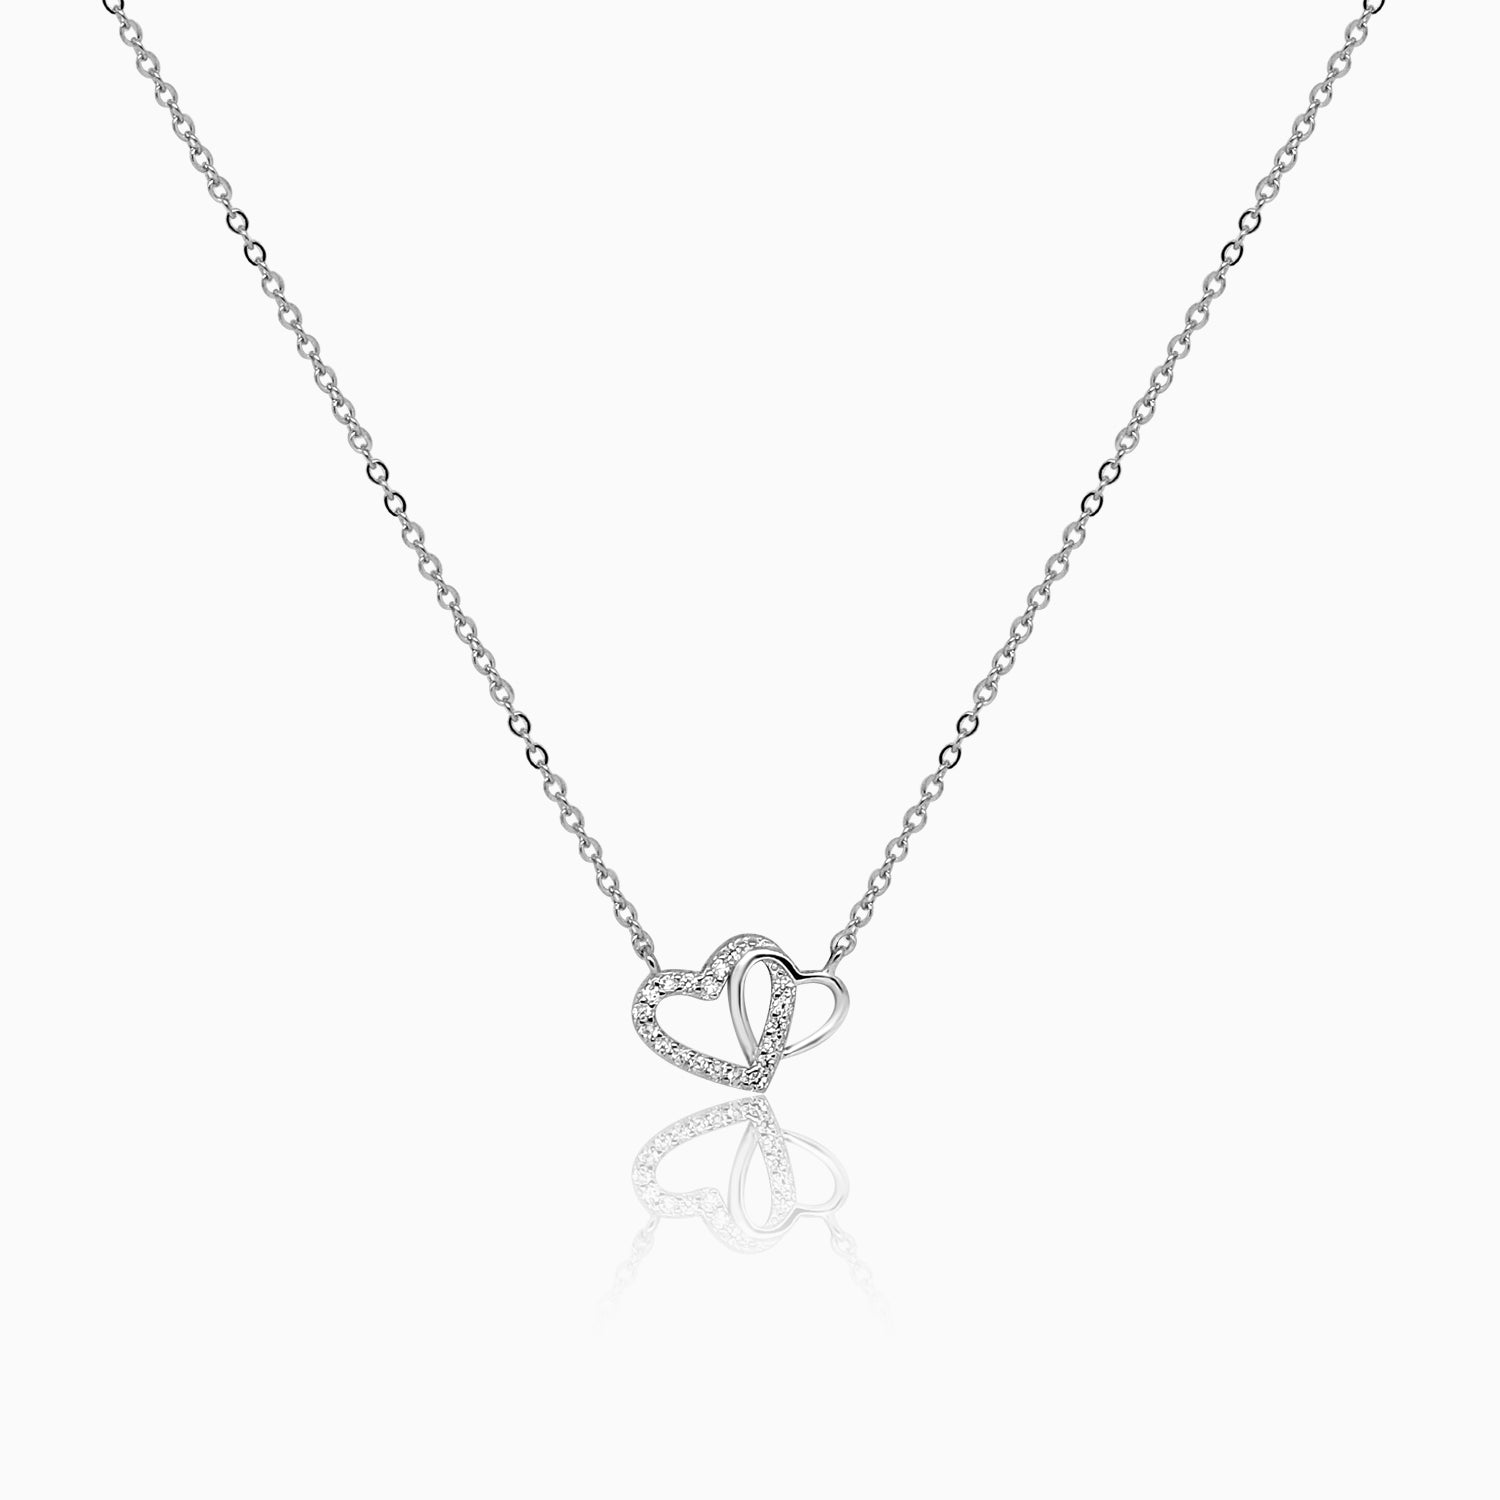 Silver Sparkling Intertwined Love Hearts Necklace